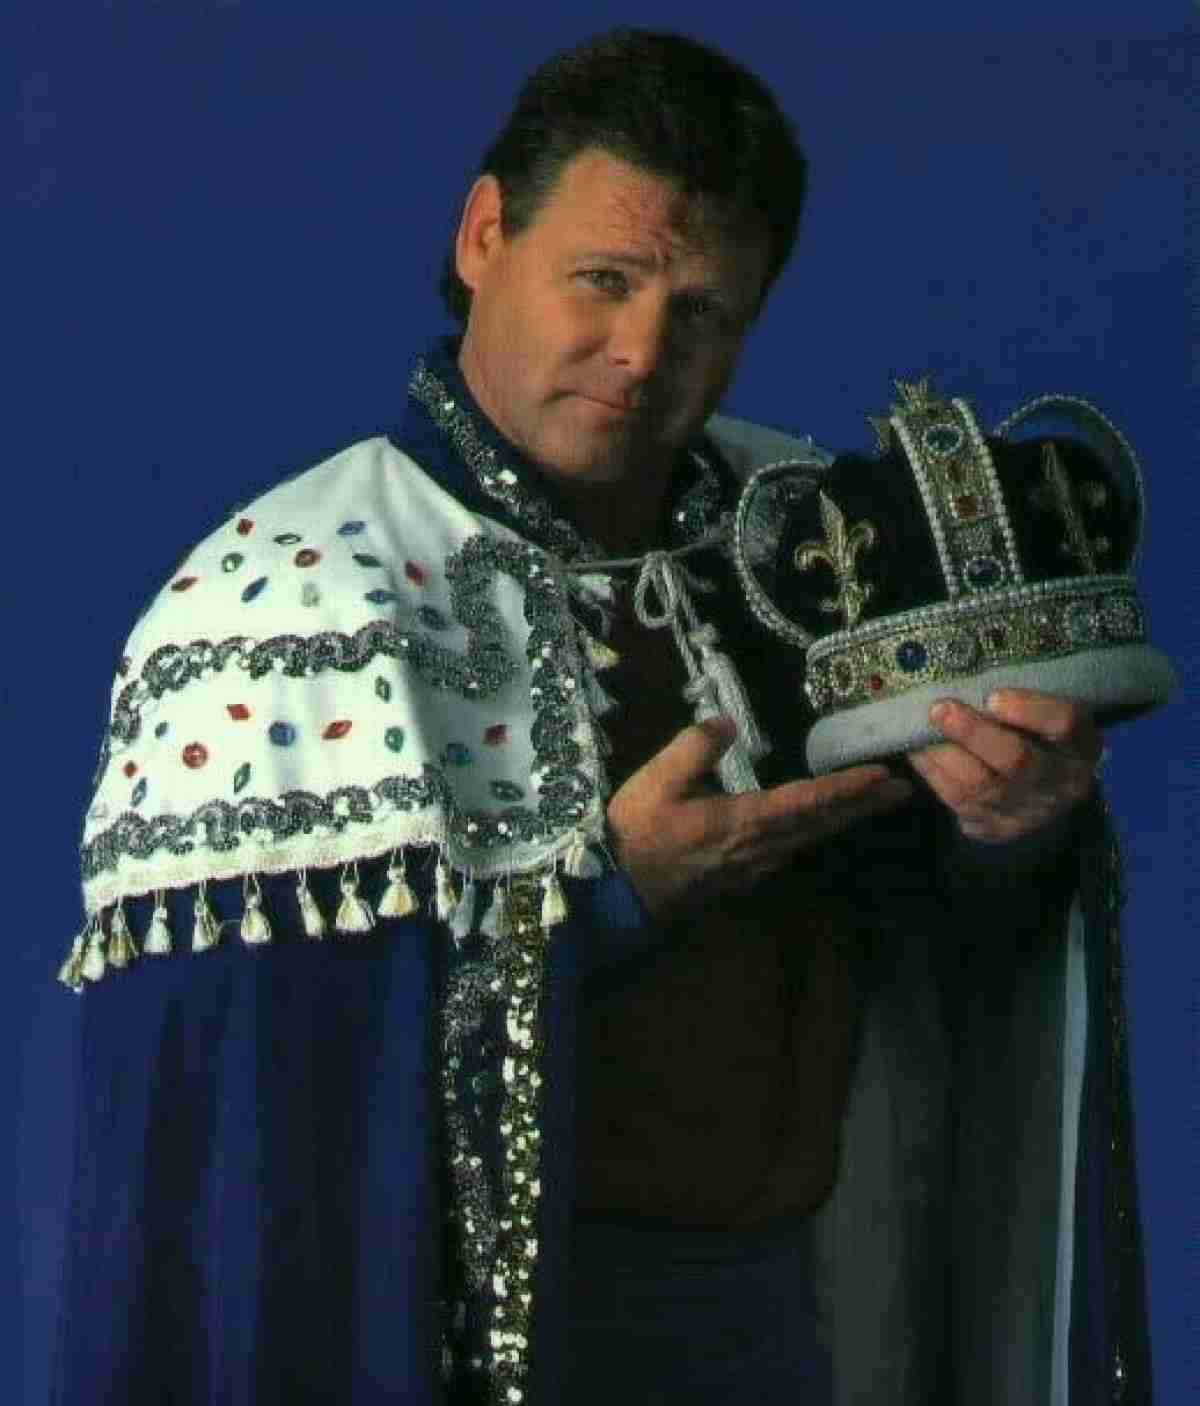 Jerry Lawler - An Iconic Wrestling Announcer Wallpaper